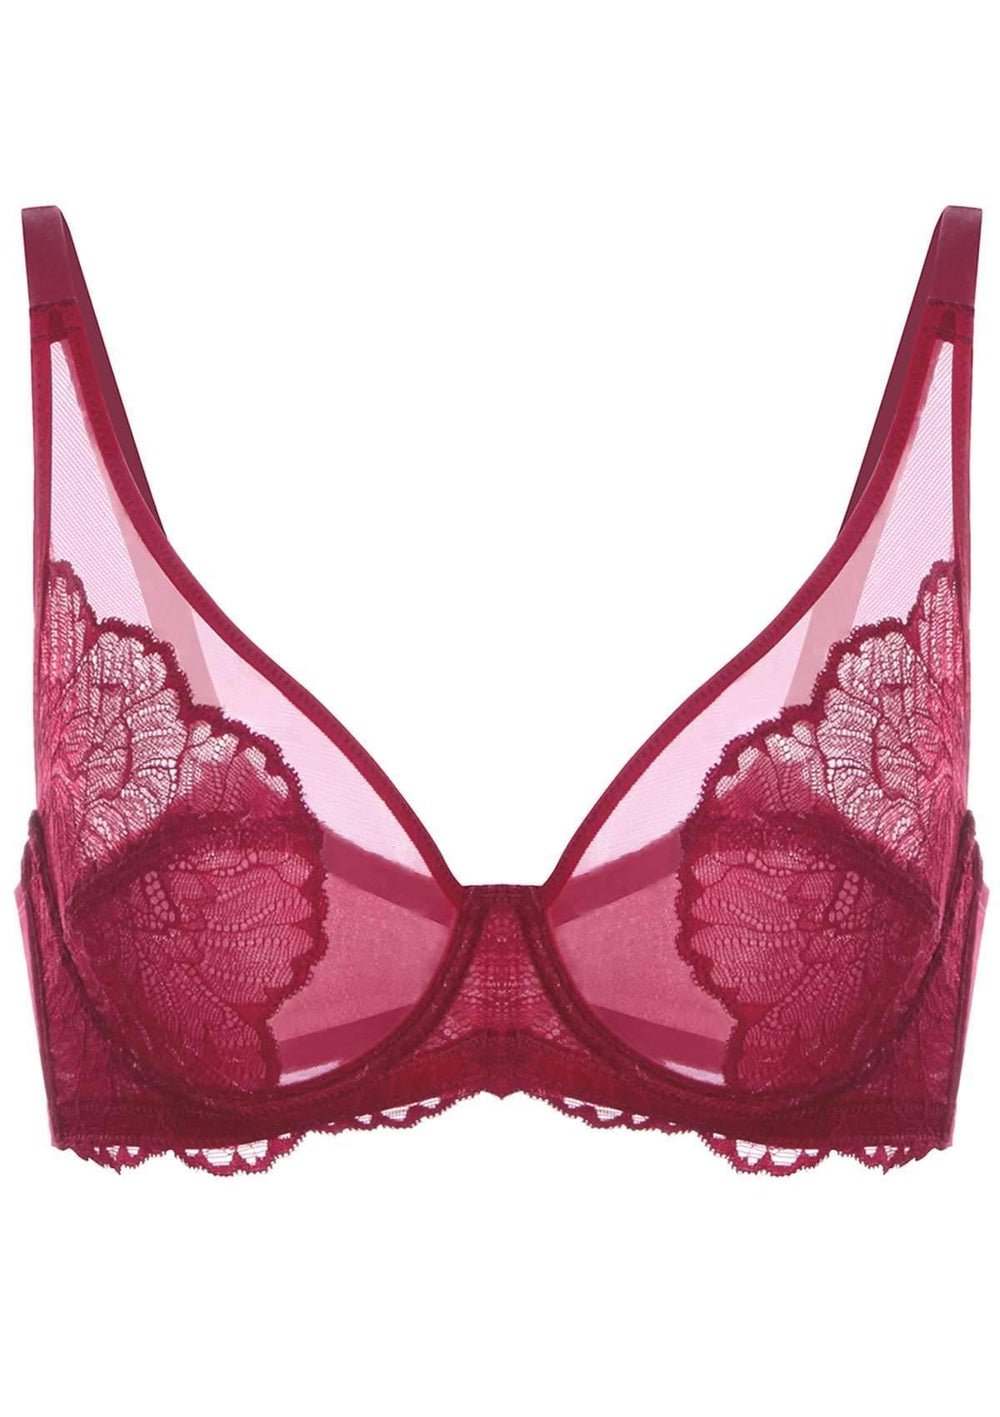 Wacoal Seamless Halo Lace Underwire 851250 Unlined Pinkish Red